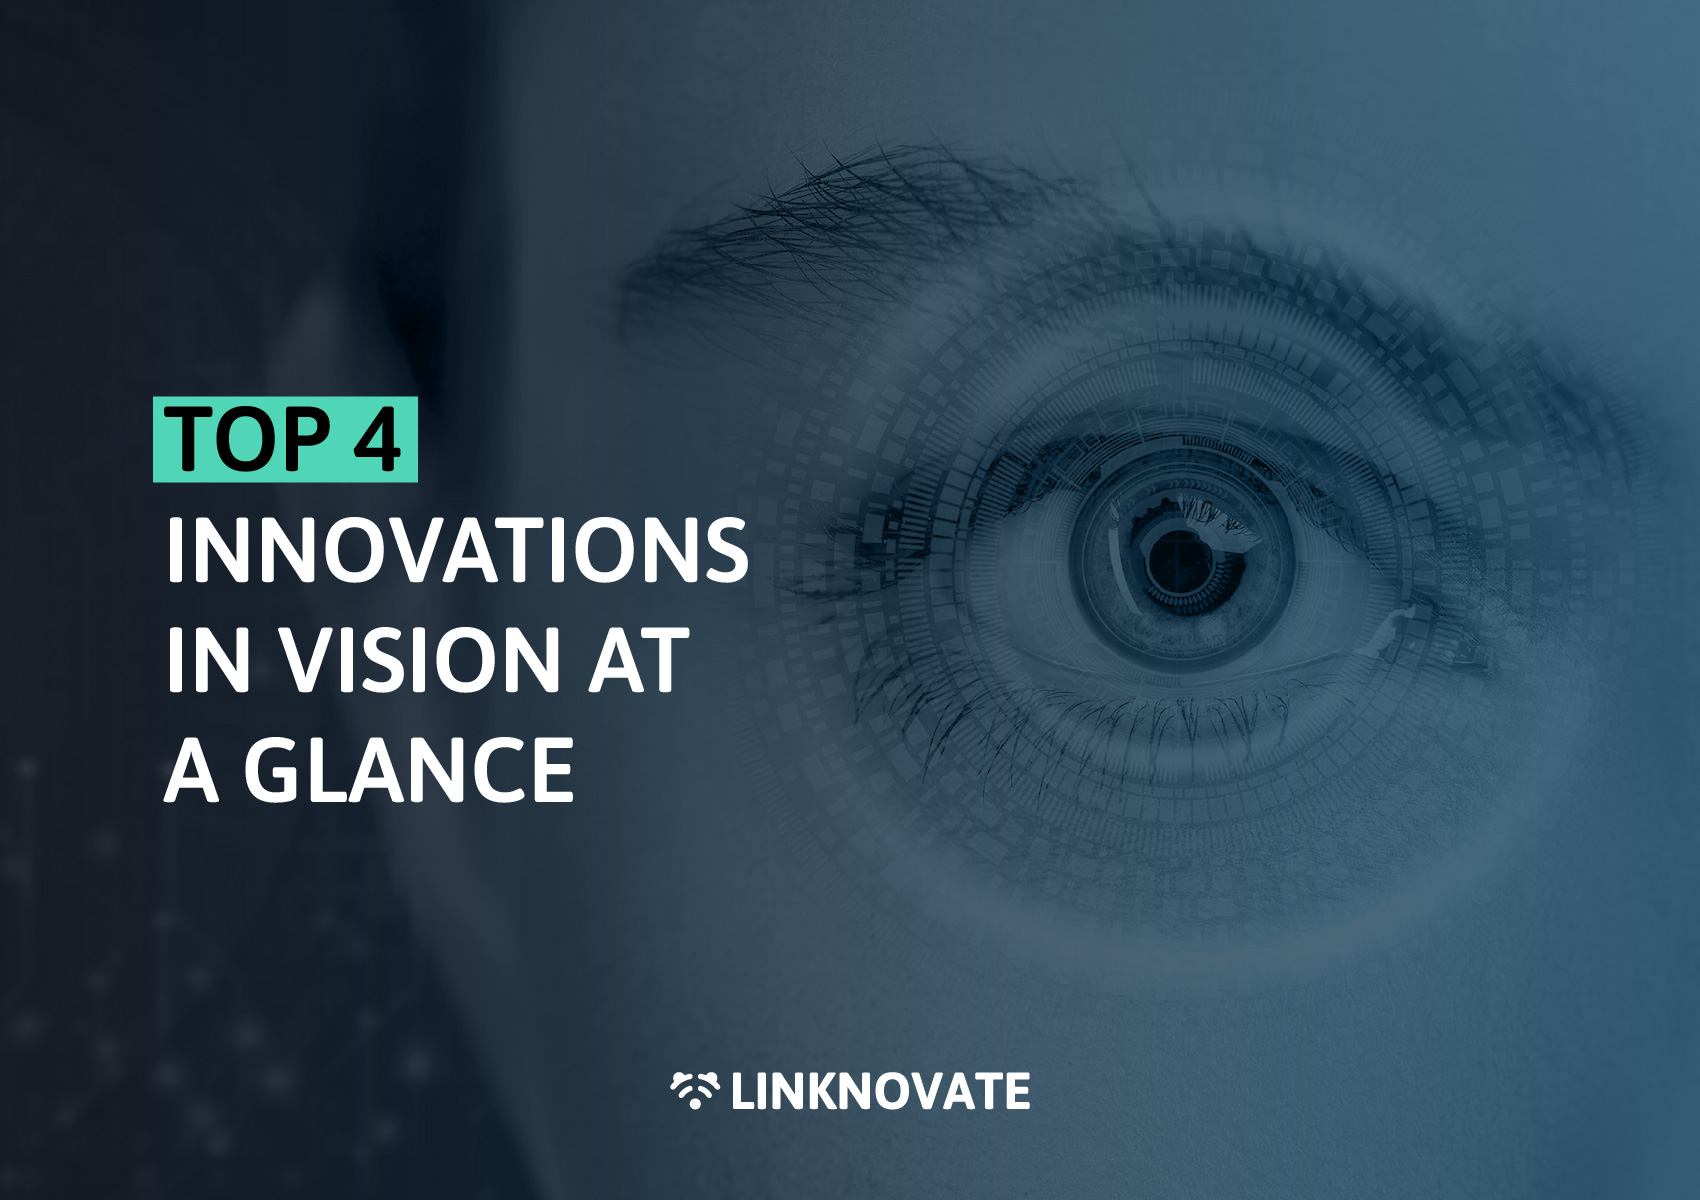 Top 4 Innovations in Vision